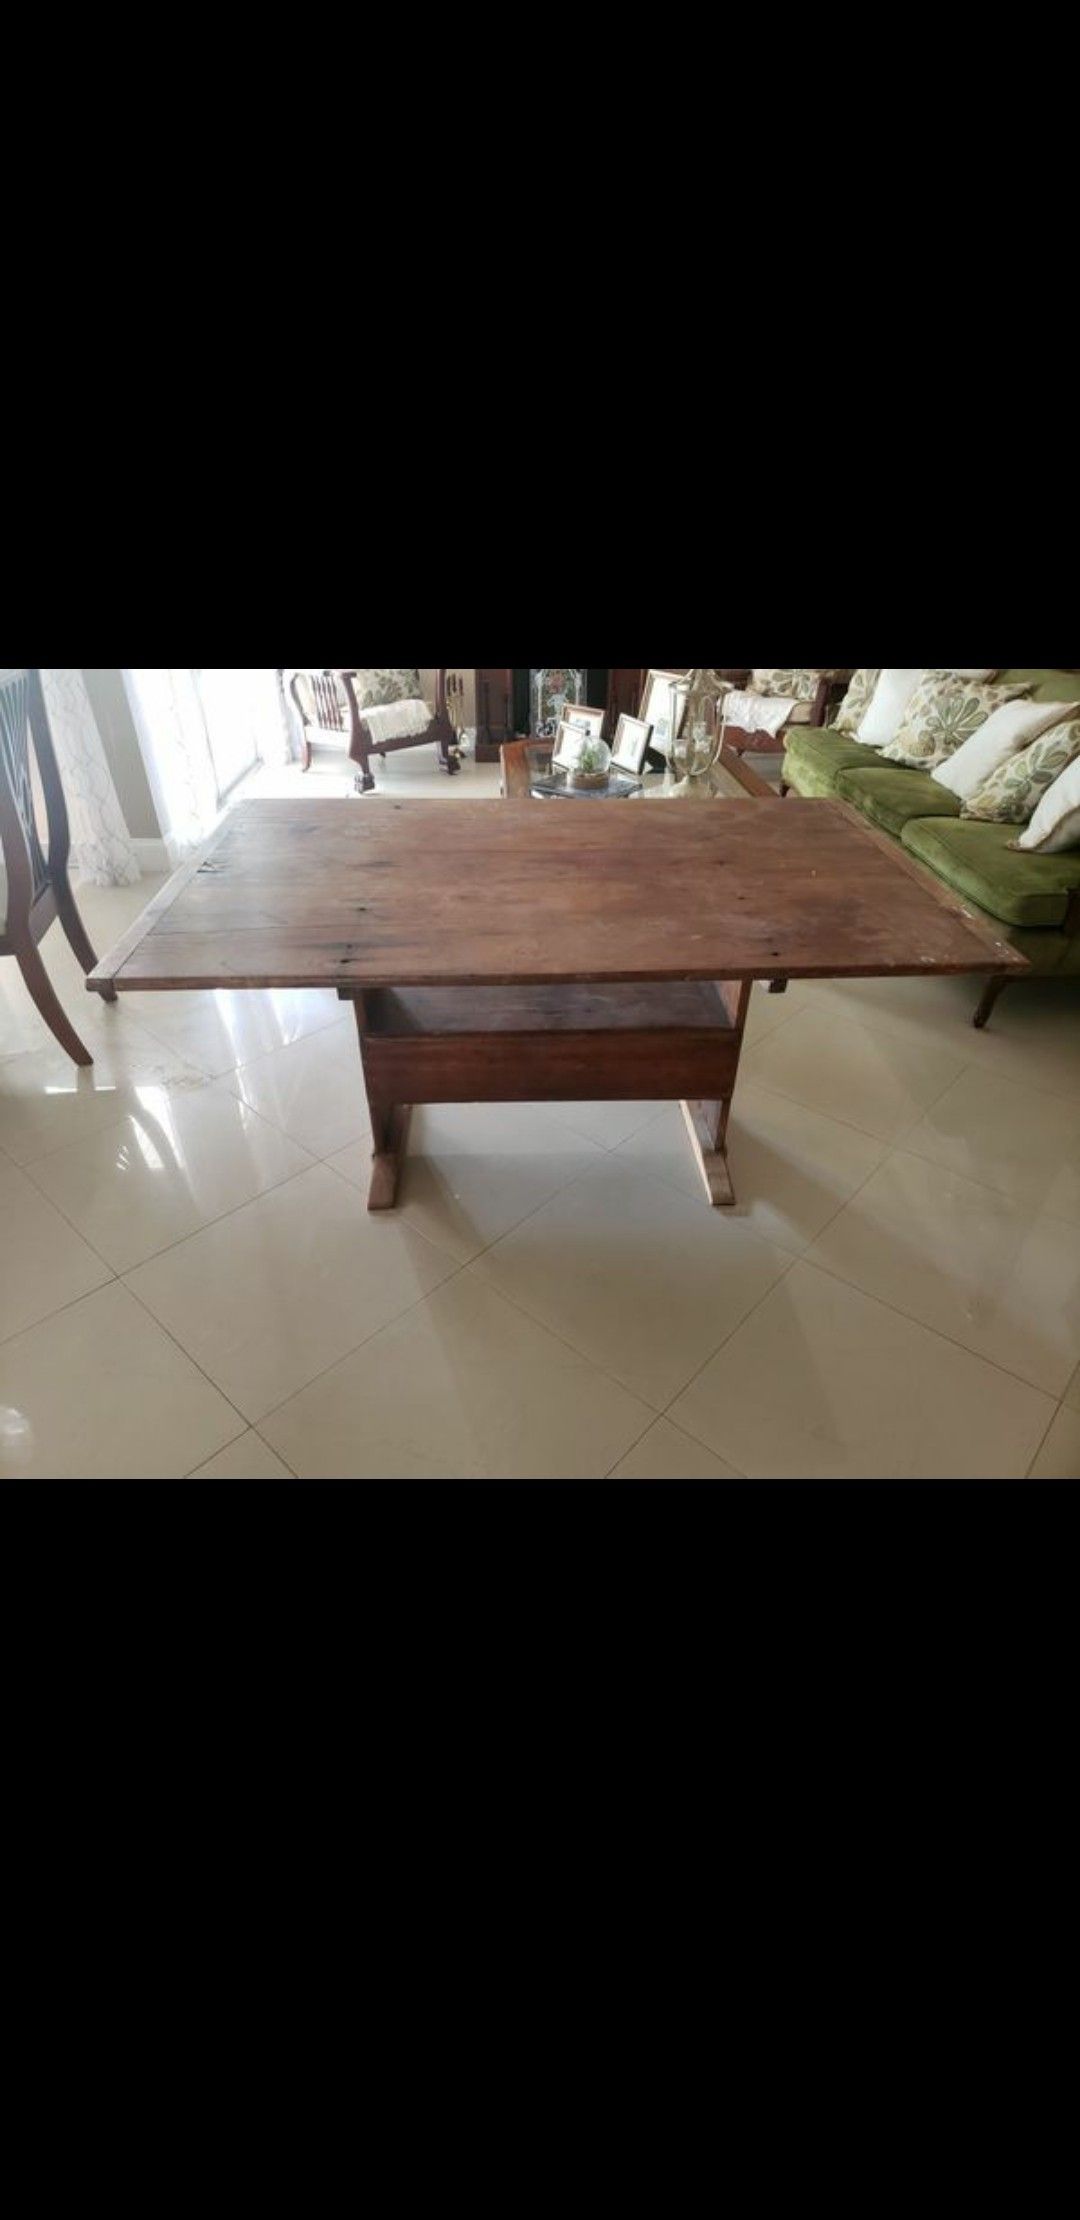 Antique table / bench